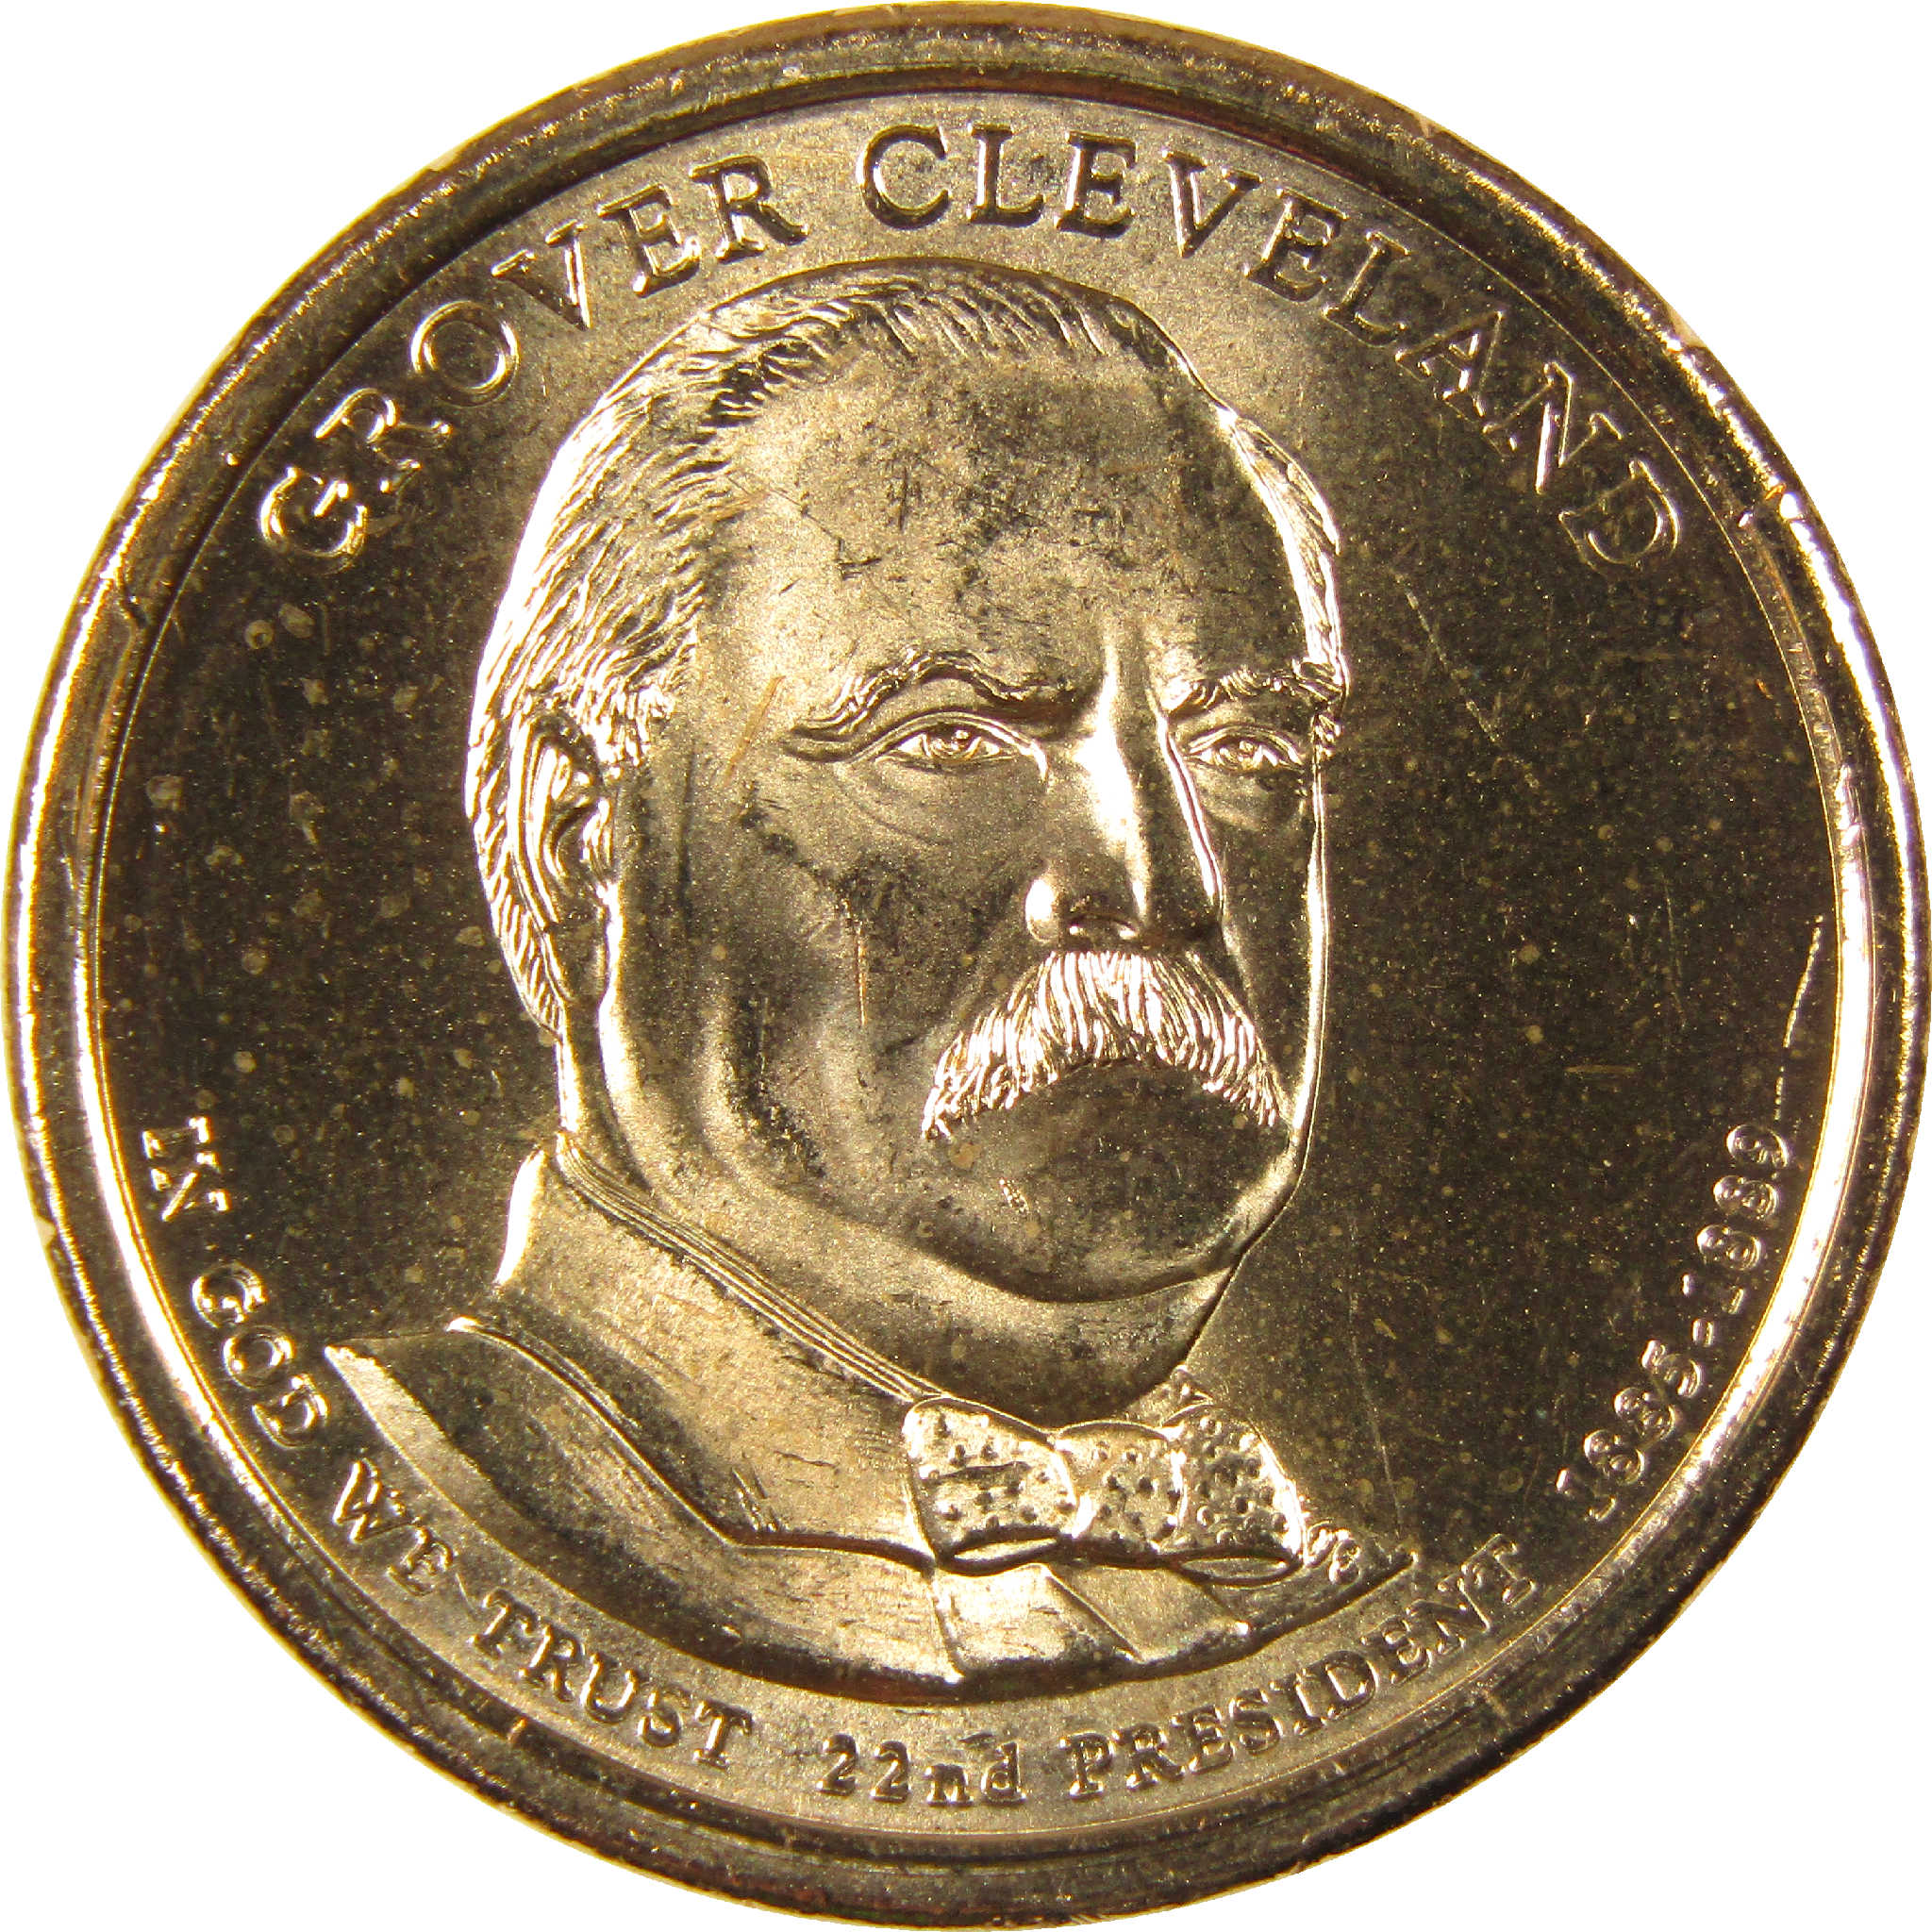 2012 D Grover Cleveland 1st Term Presidential Dollar Uncirculated $1